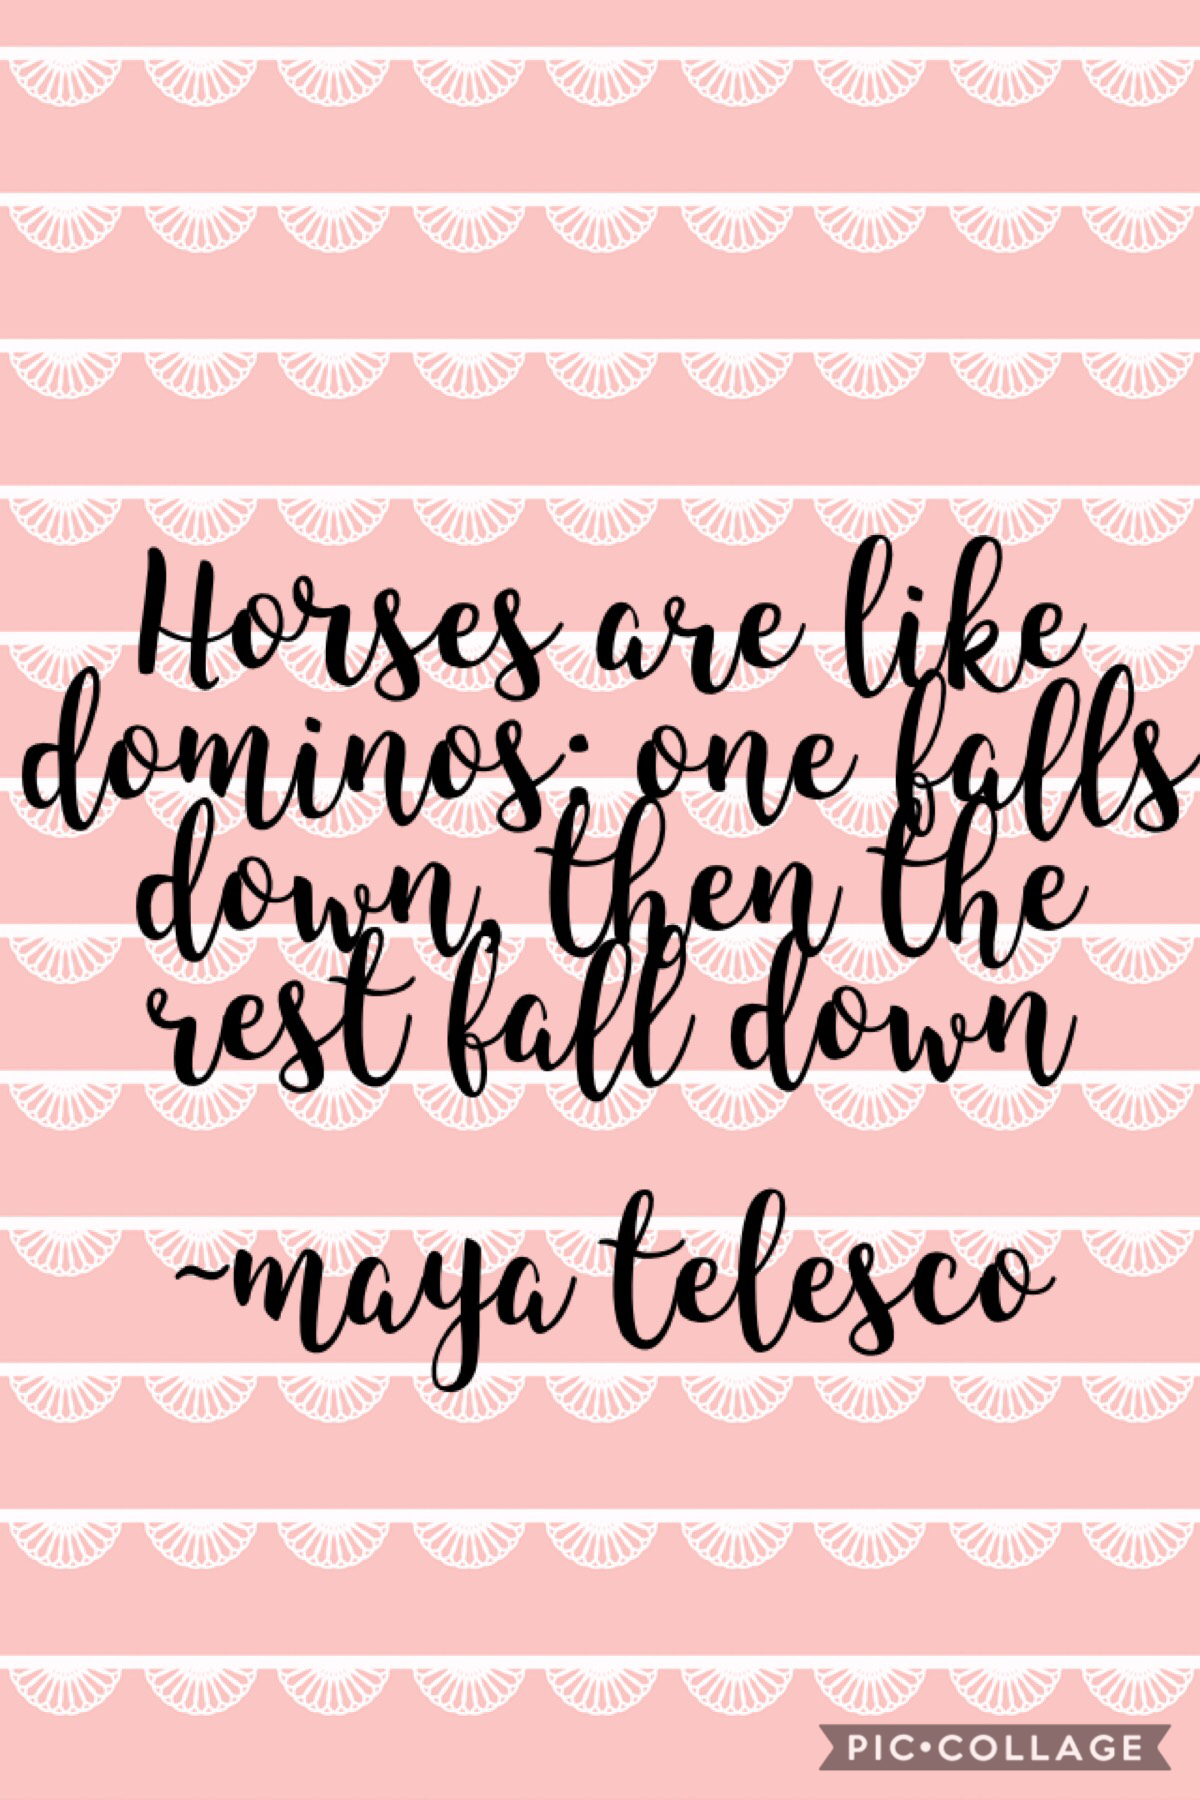 I’m maya and I made up this random quote today... don’t ask.